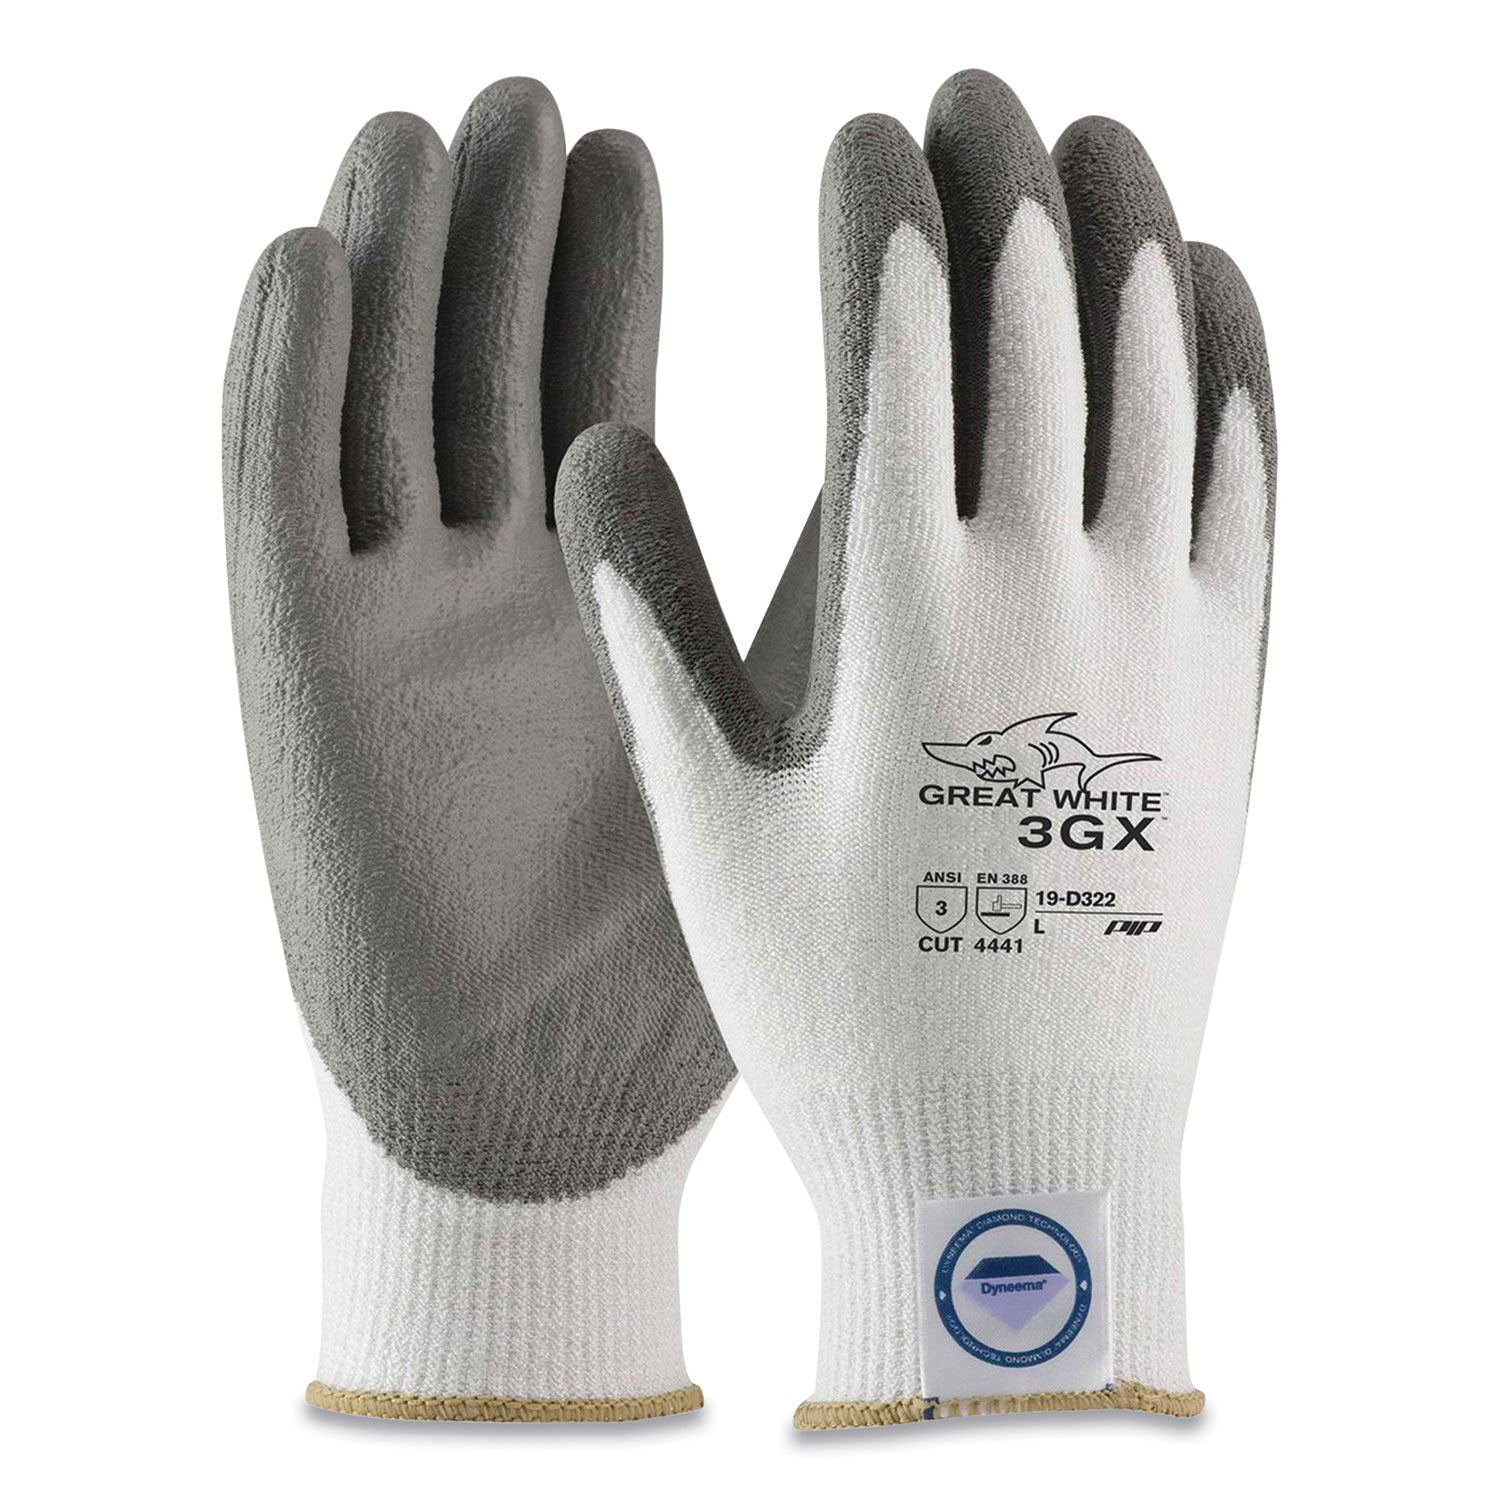 great-white-3gx-seamless-knit-dyneema-diamond-blended-gloves-x-large-white-gray_pid19d322xl - 2